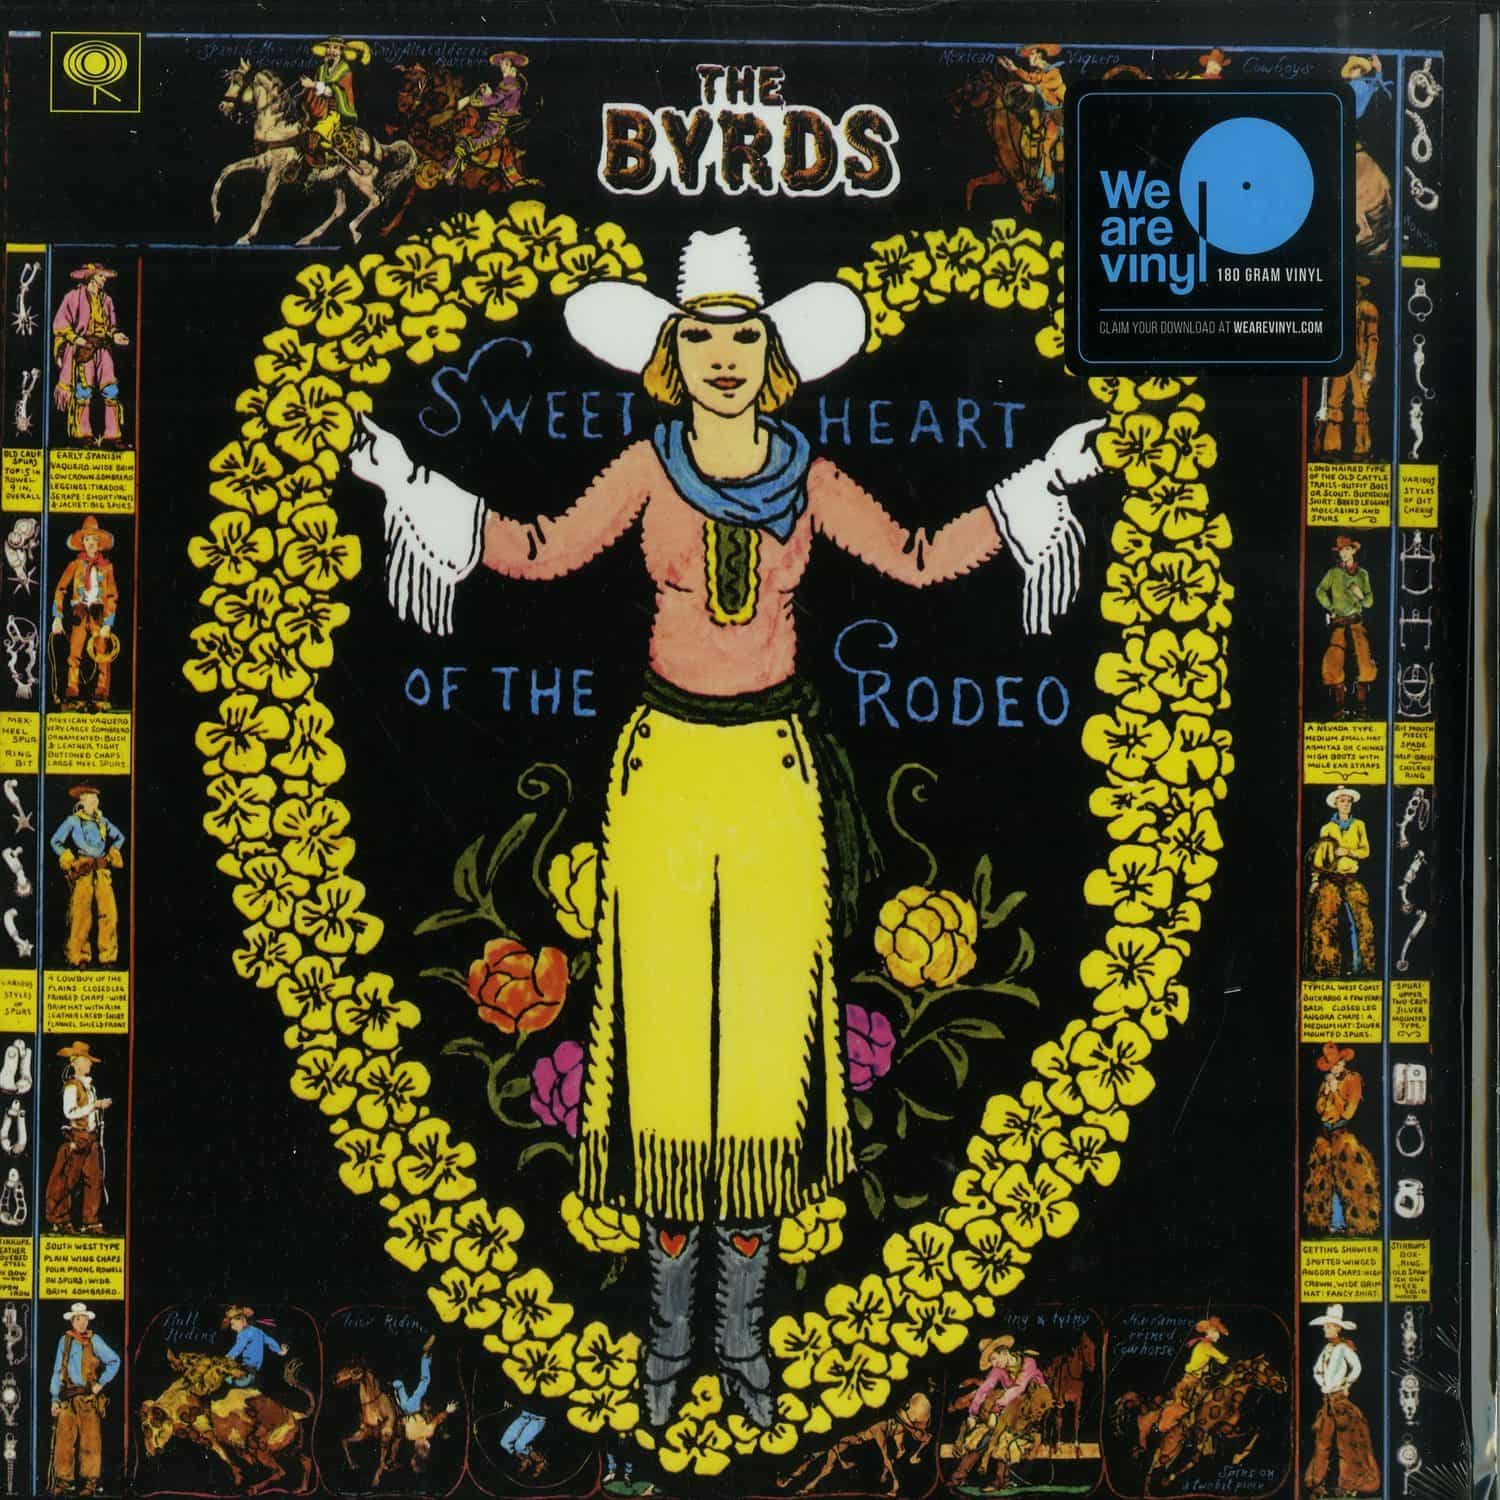 The Byrds - SWEETHEART OF THE RODEO 